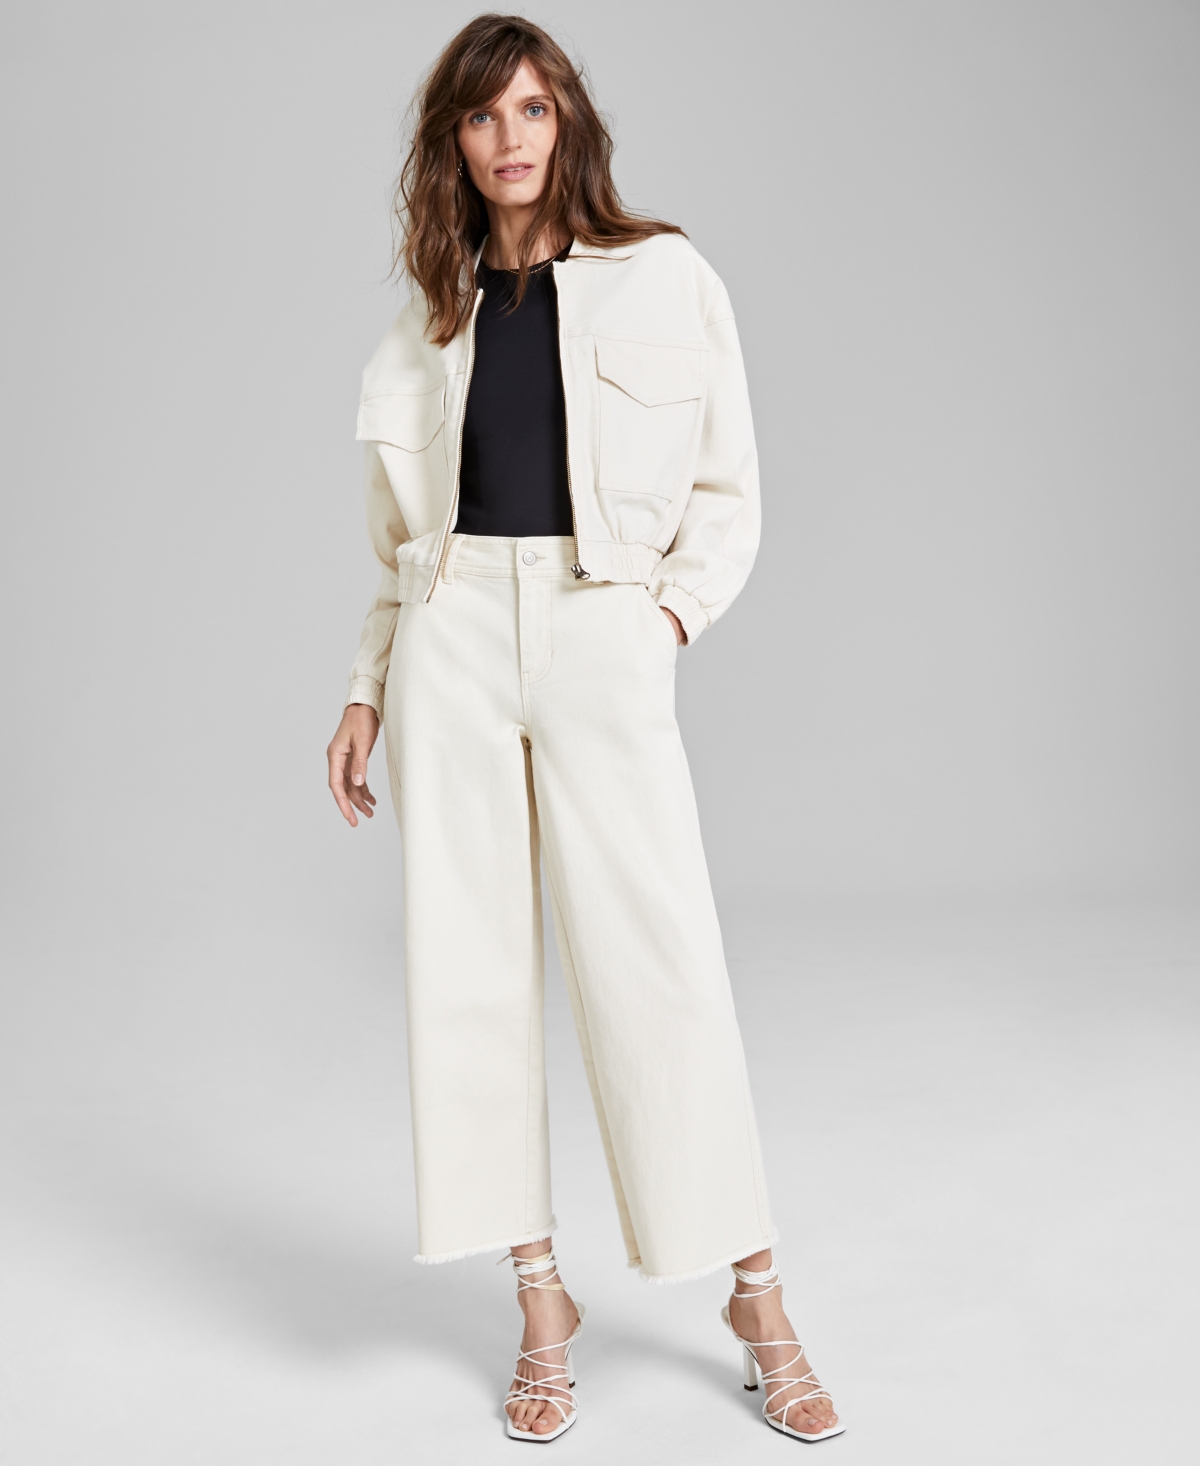 Women's Relaxed-Fit Bomber Jacket - White Swan